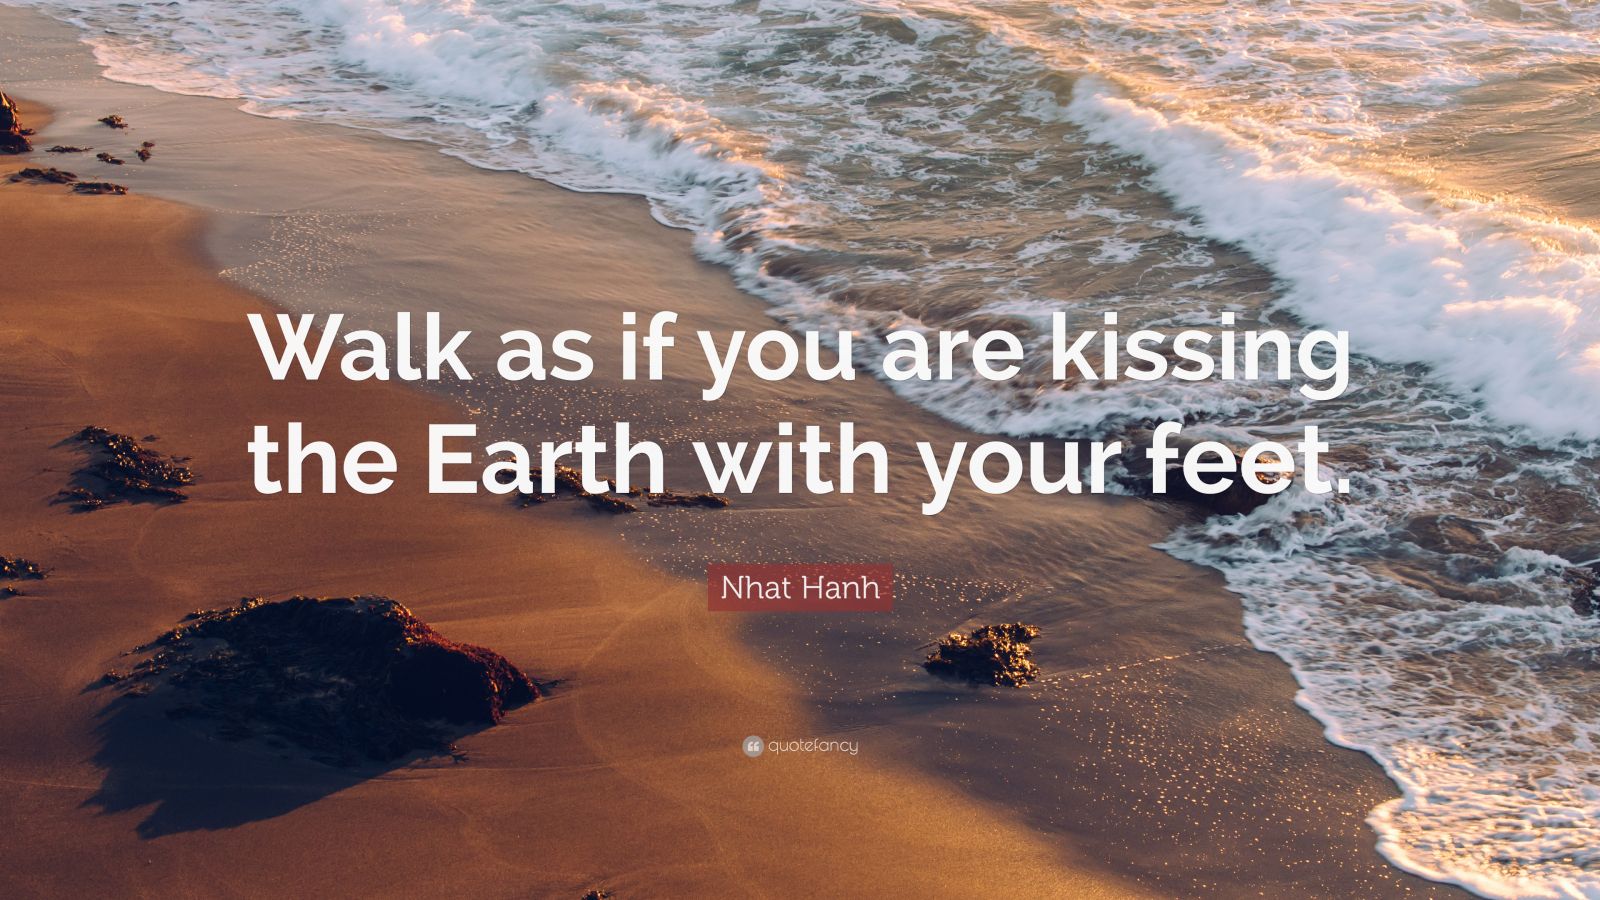 Nhat Hanh Quote: “Walk as if you are kissing the Earth with your feet ...